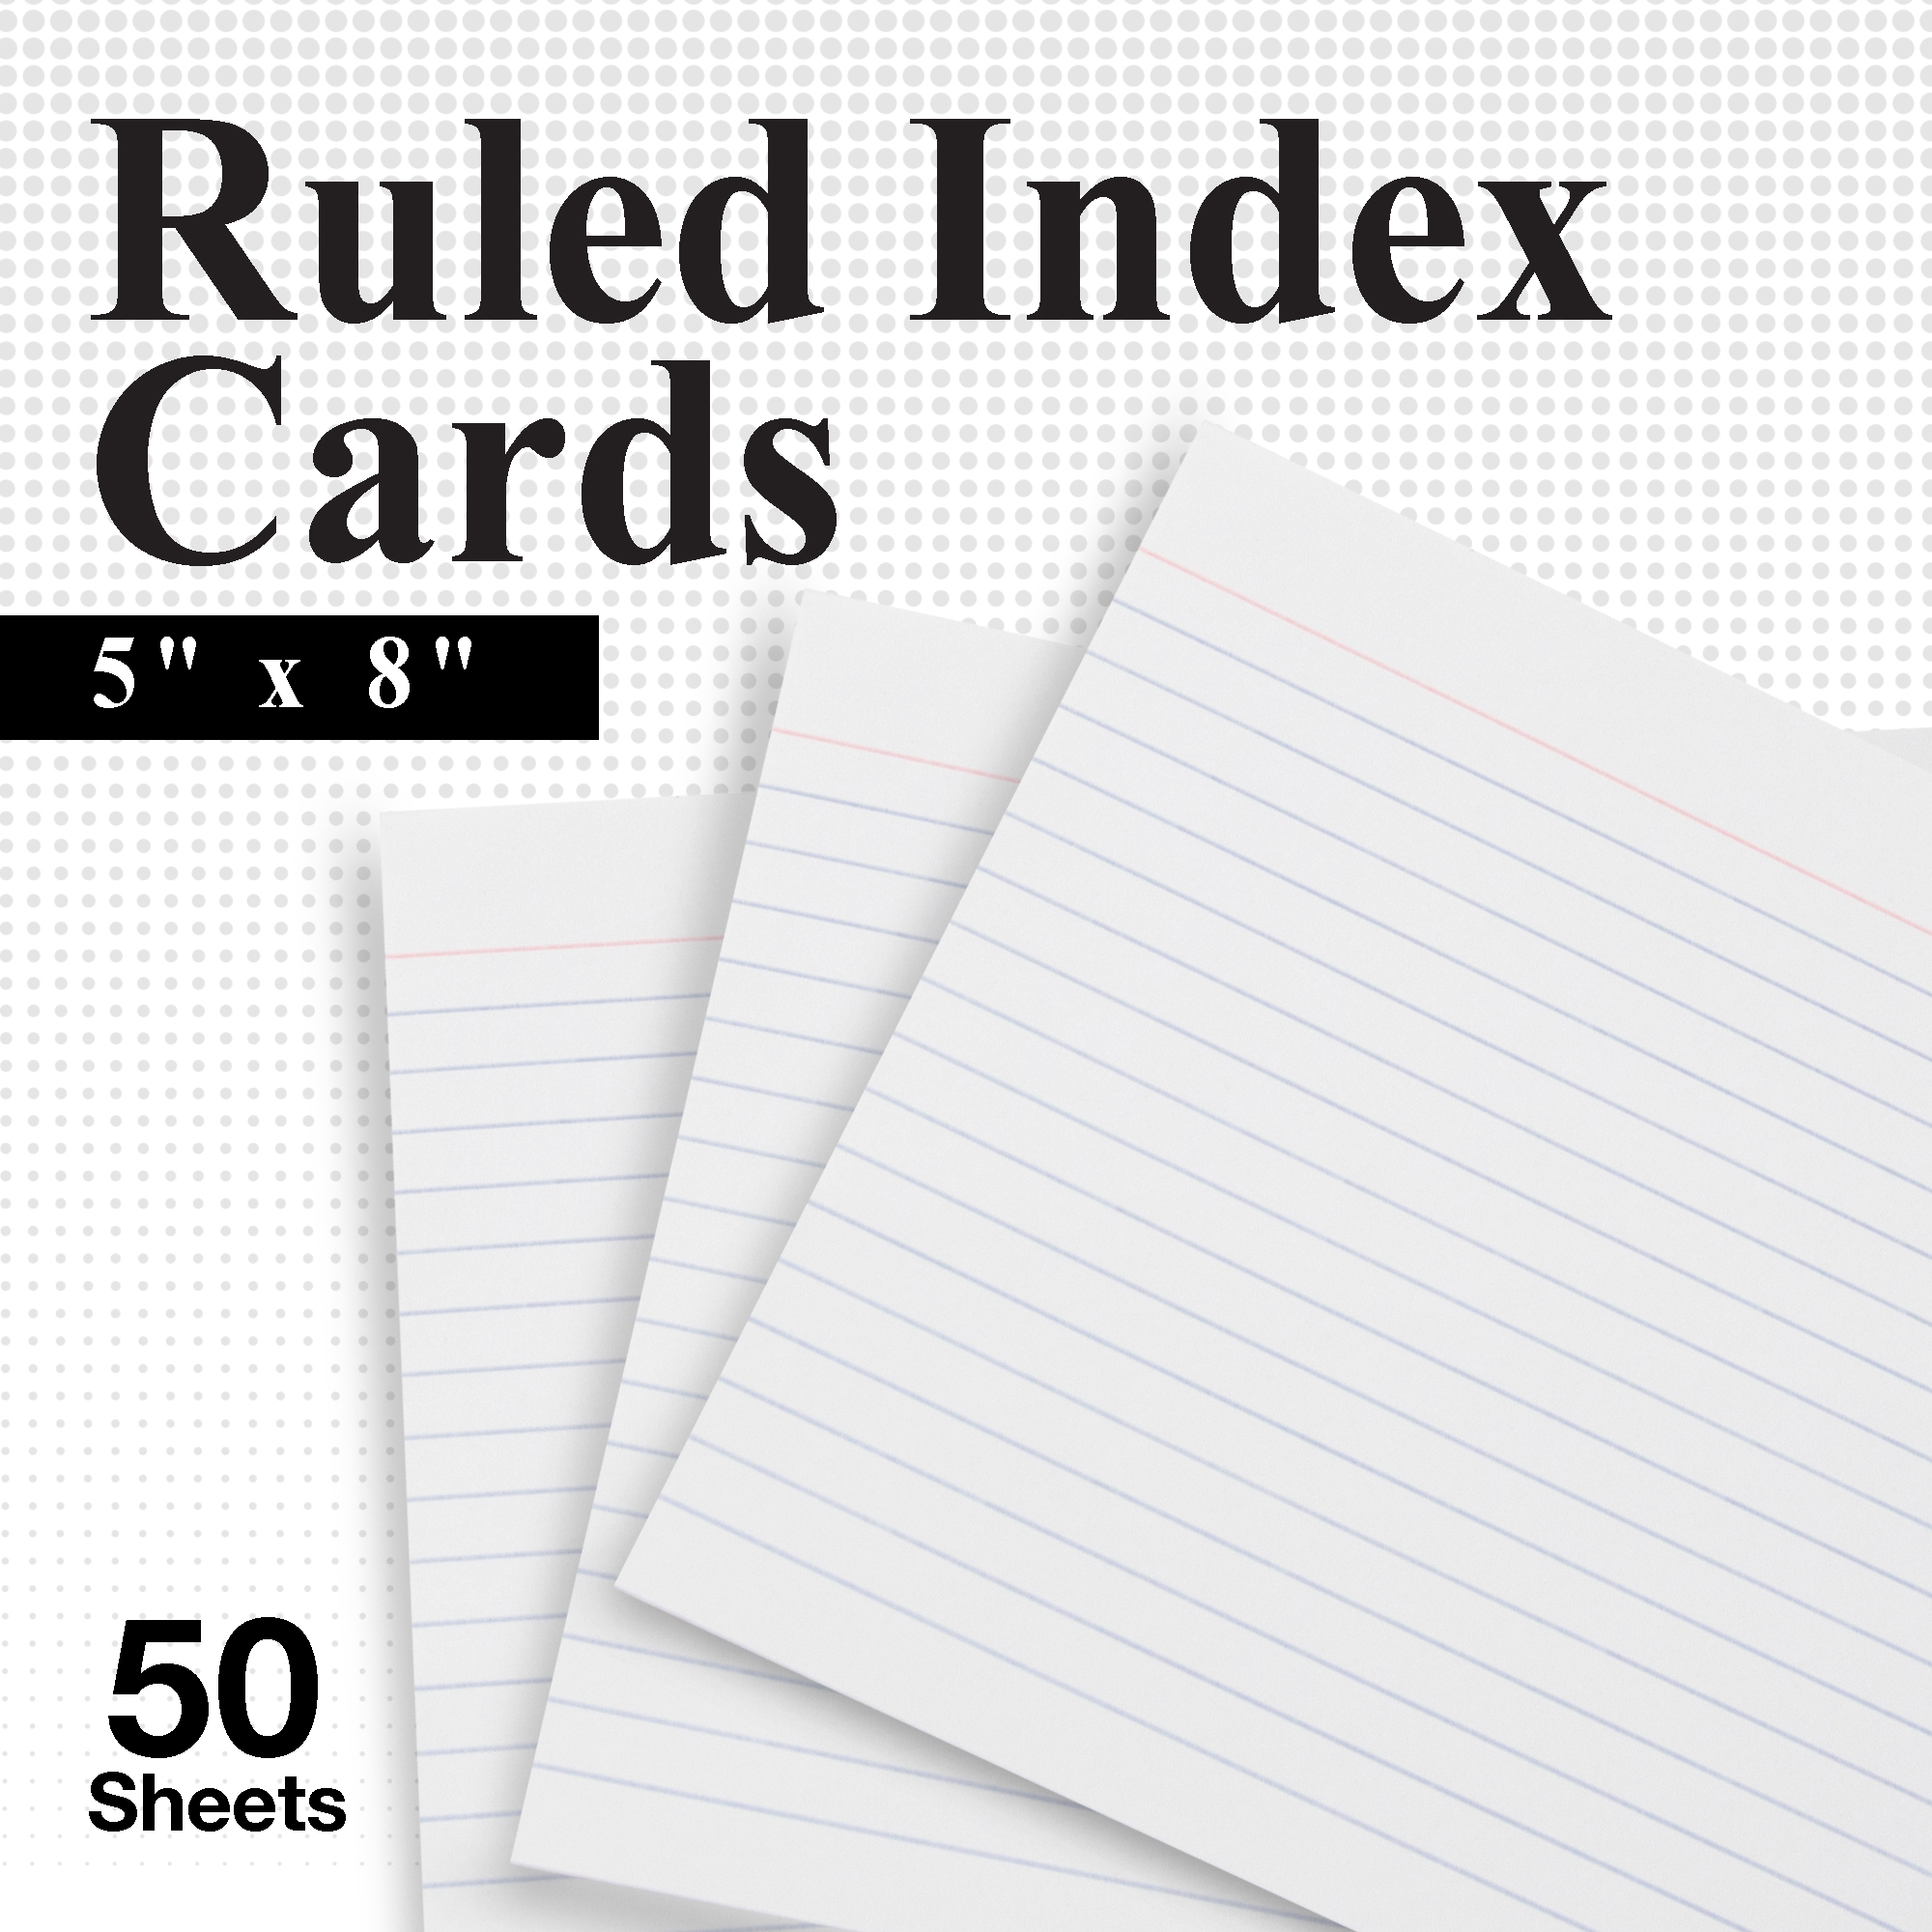 School & Office supplies - Notebook & Paper - Index Cards - The